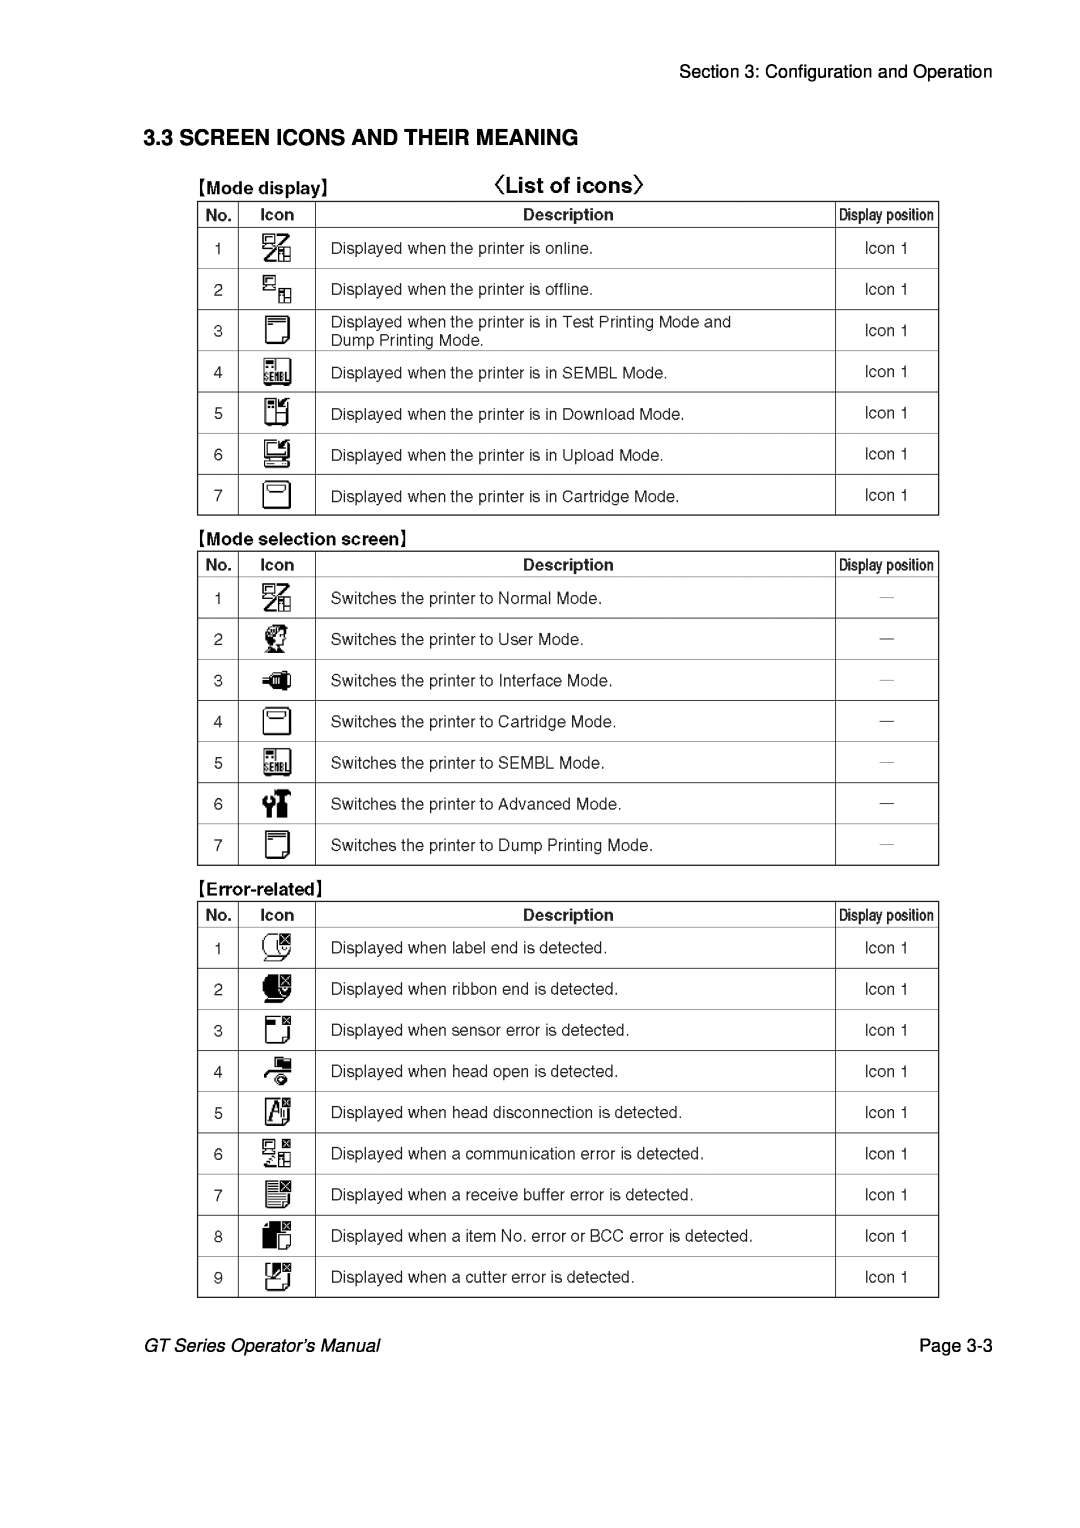 SATO GT424 manual Screen Icons And Their Meaning, Configuration and Operation, GT Series Operator’s Manual, Page 